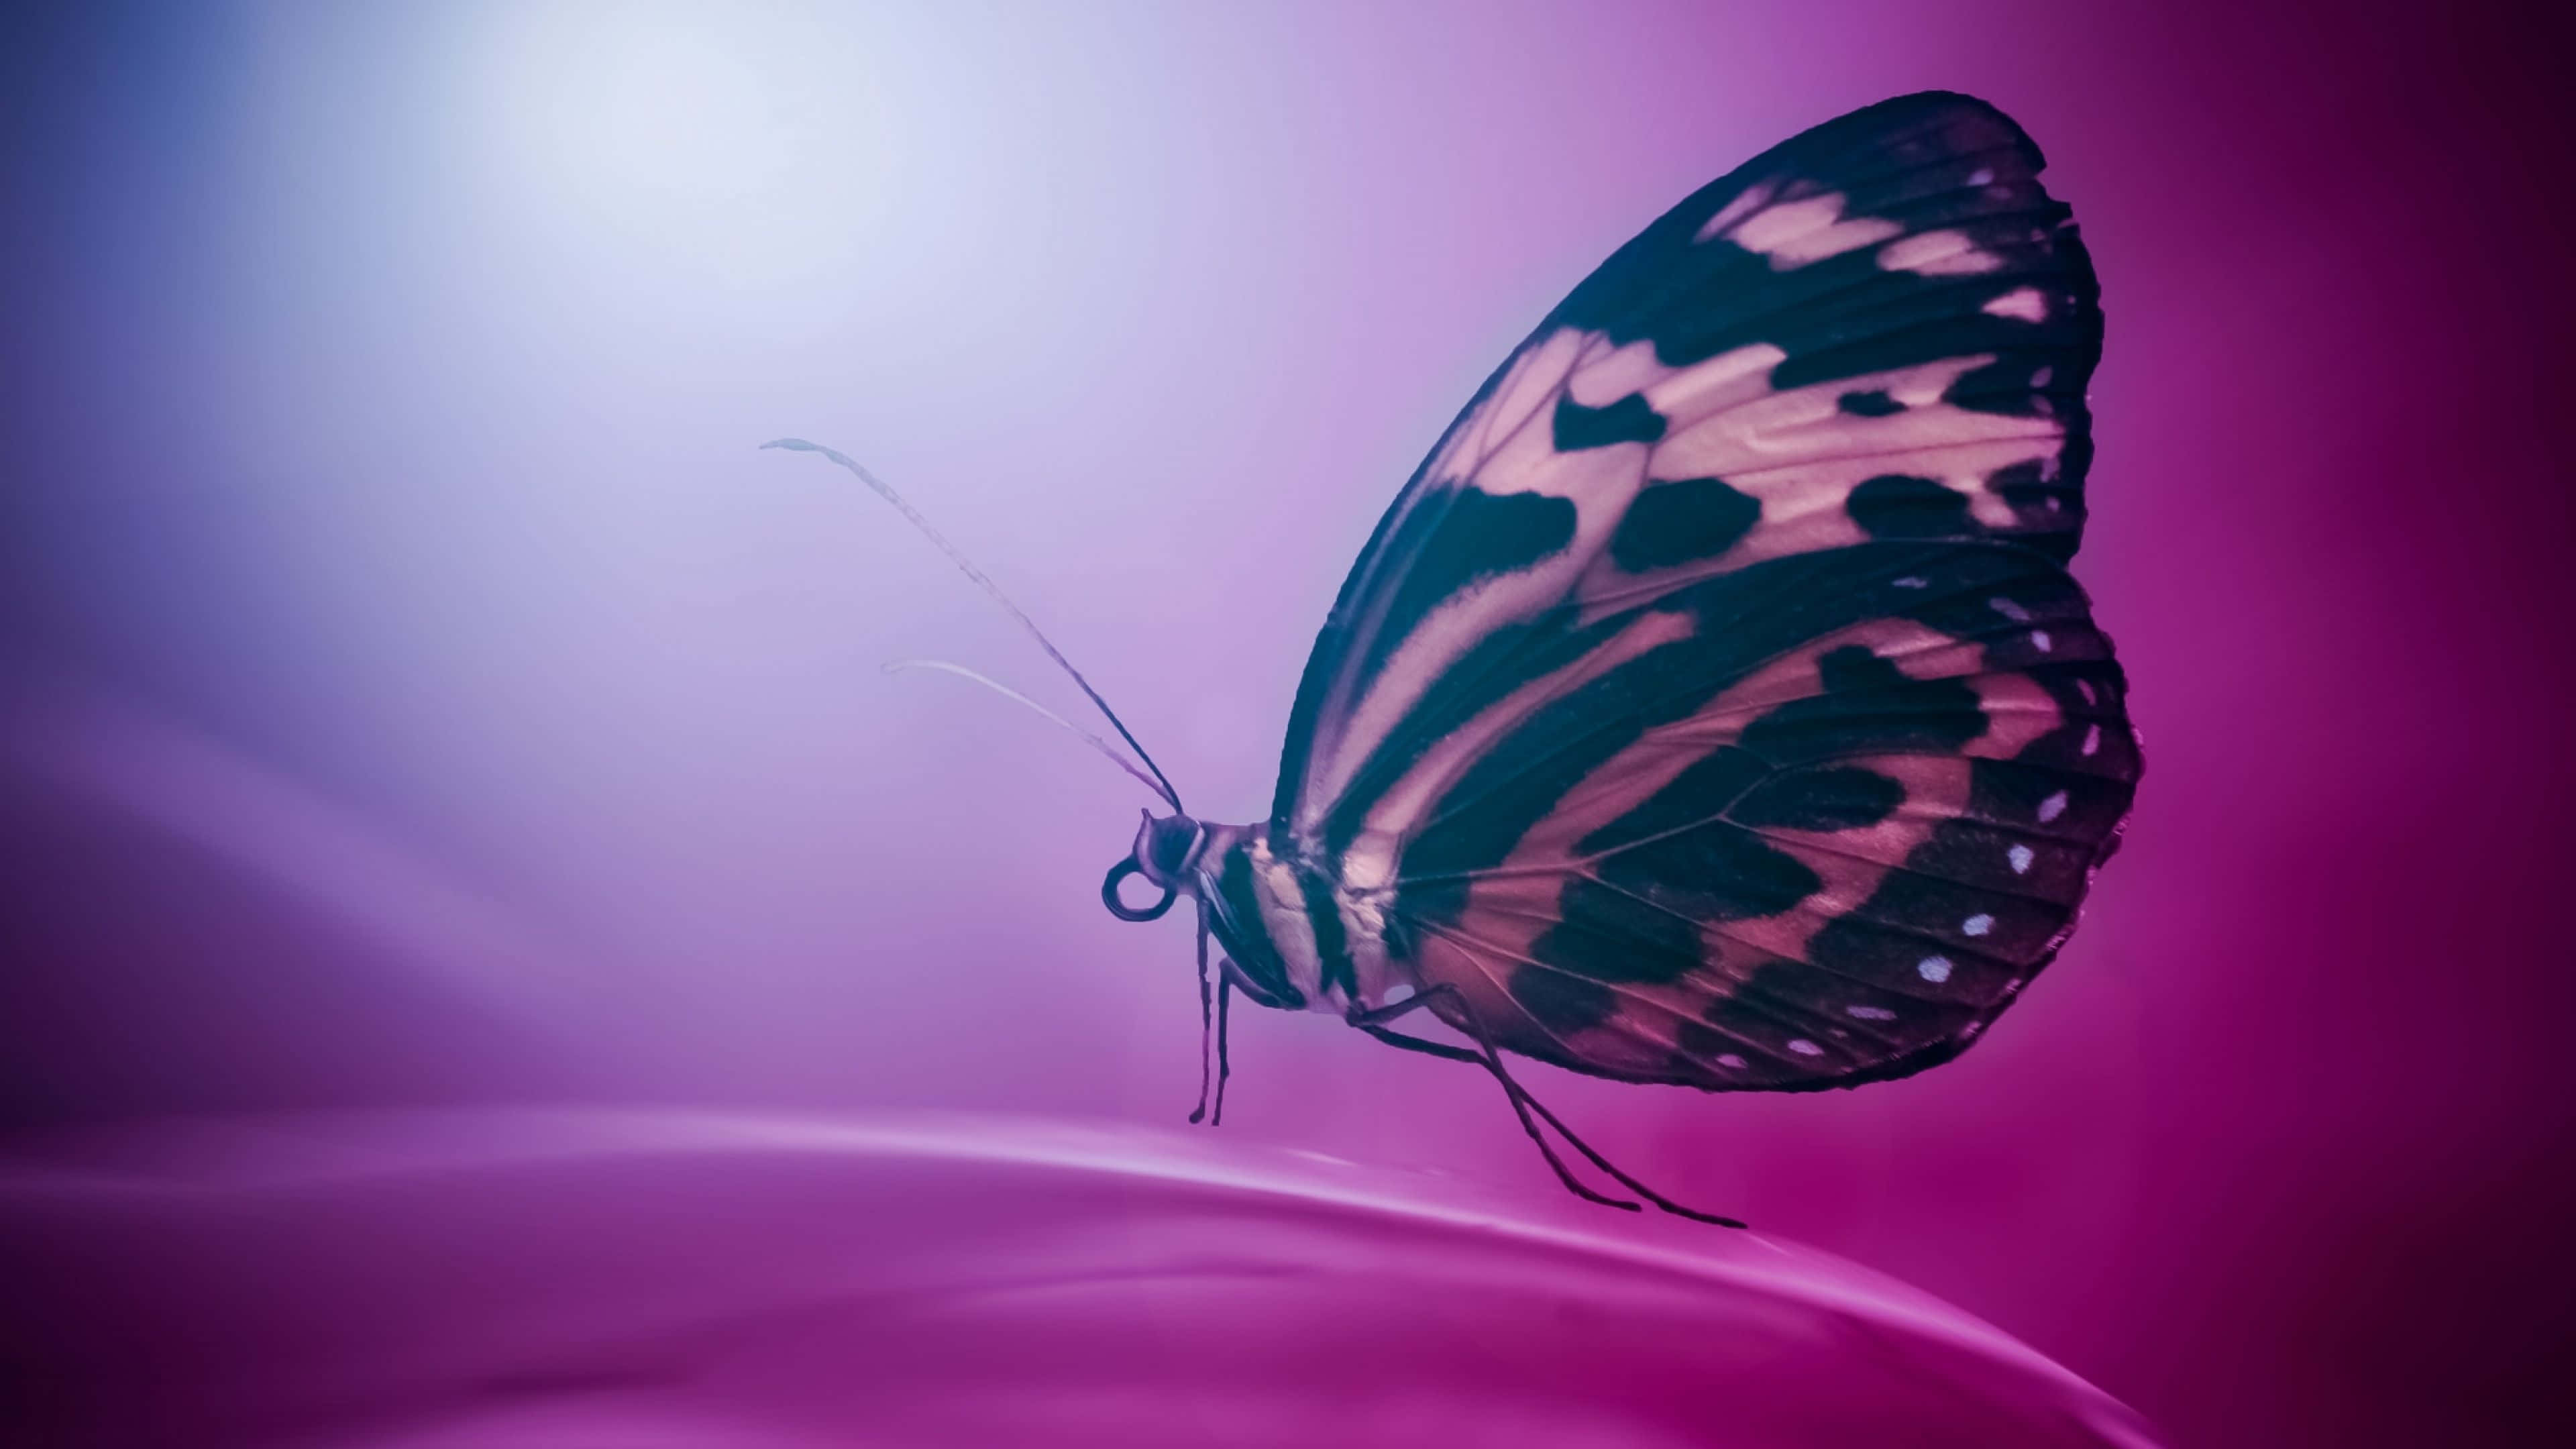 Enchanting 4k Image Of A Butterfly Wallpaper